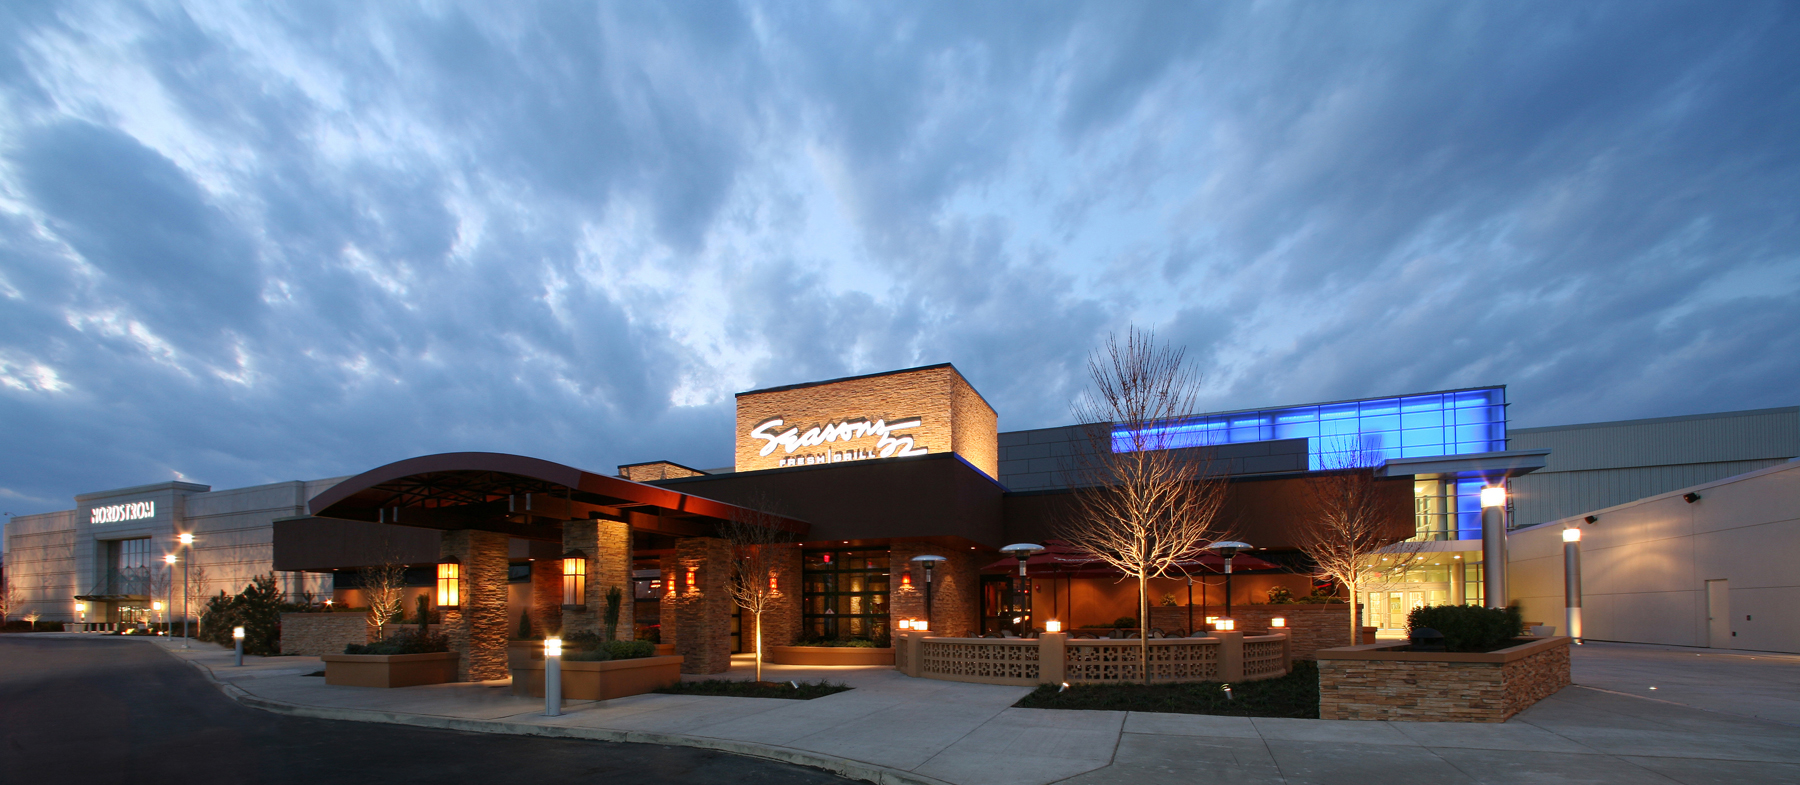 Seasons 52 at the Cherry Hill Mall Redevelopment by Torcon